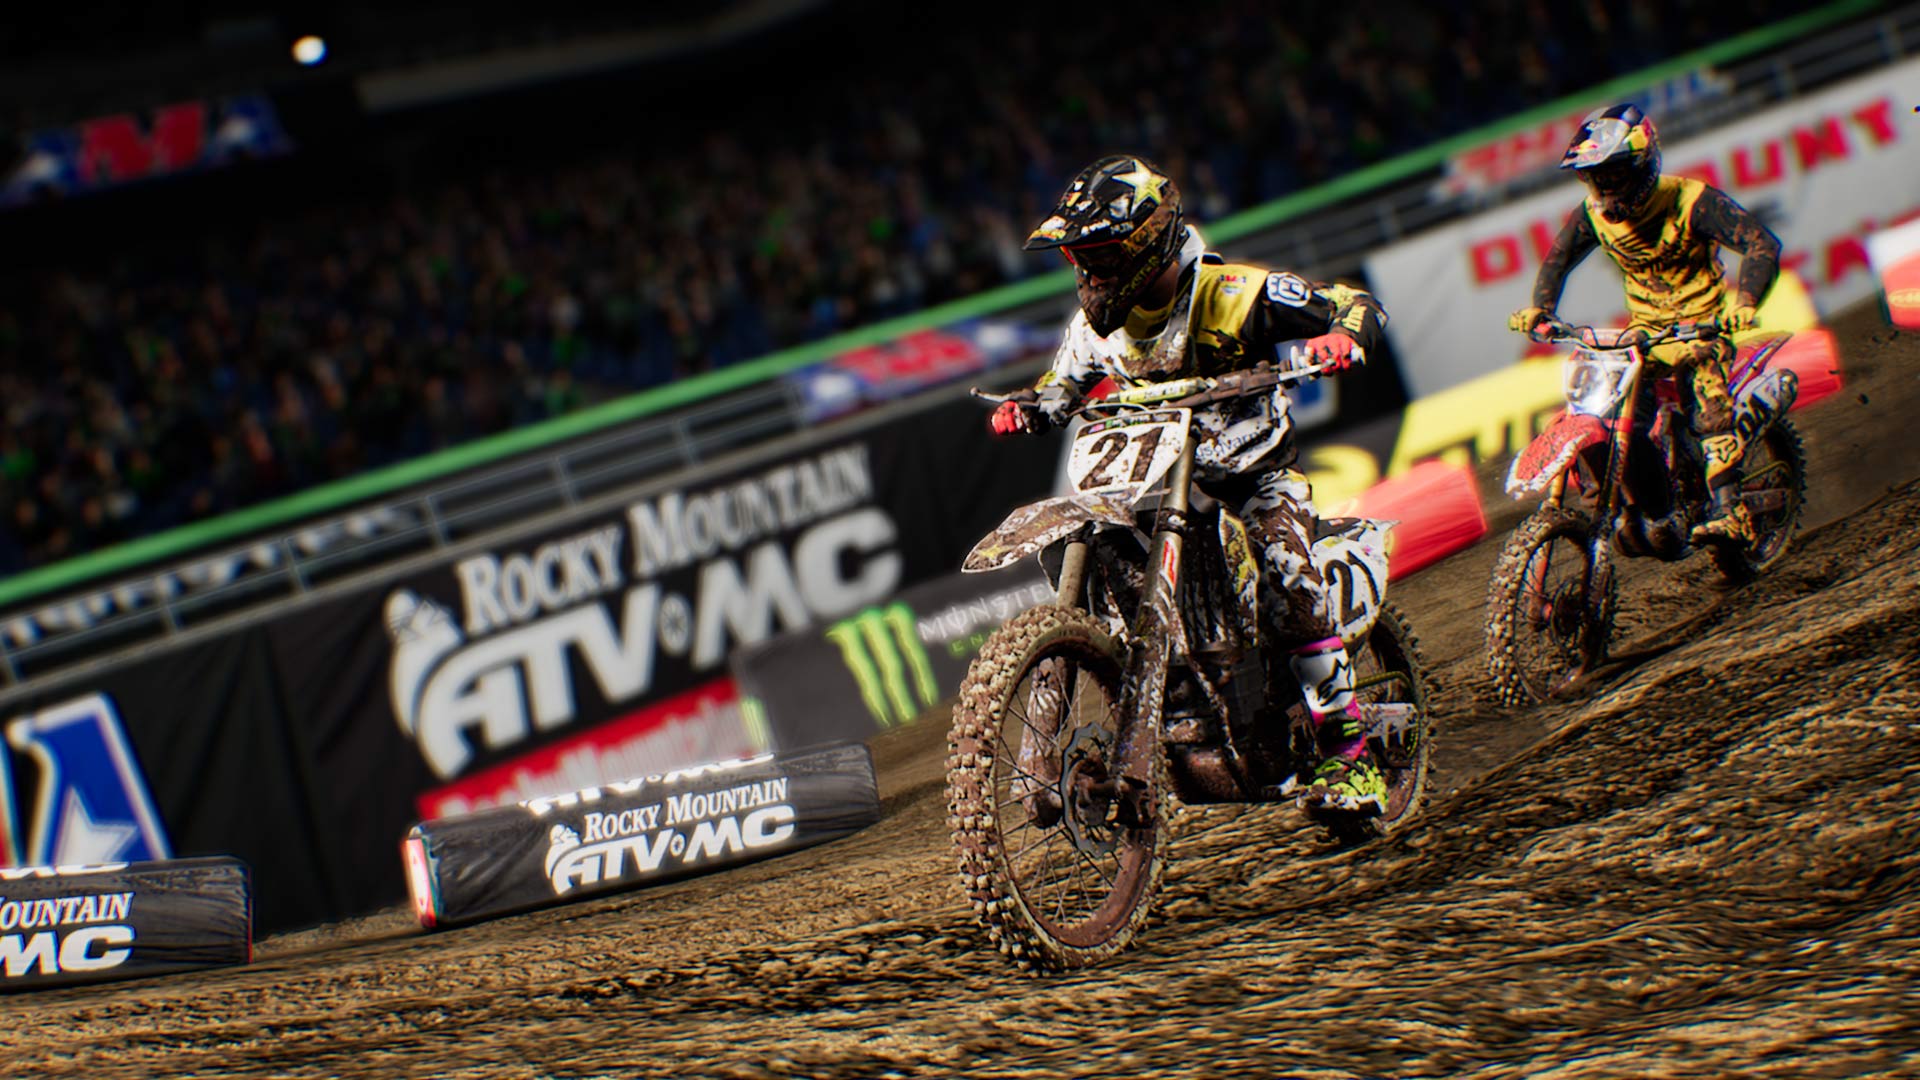 REVIEW : Monster Energy Supercross - The Official Videogame (PS4 / PS4 Pro)